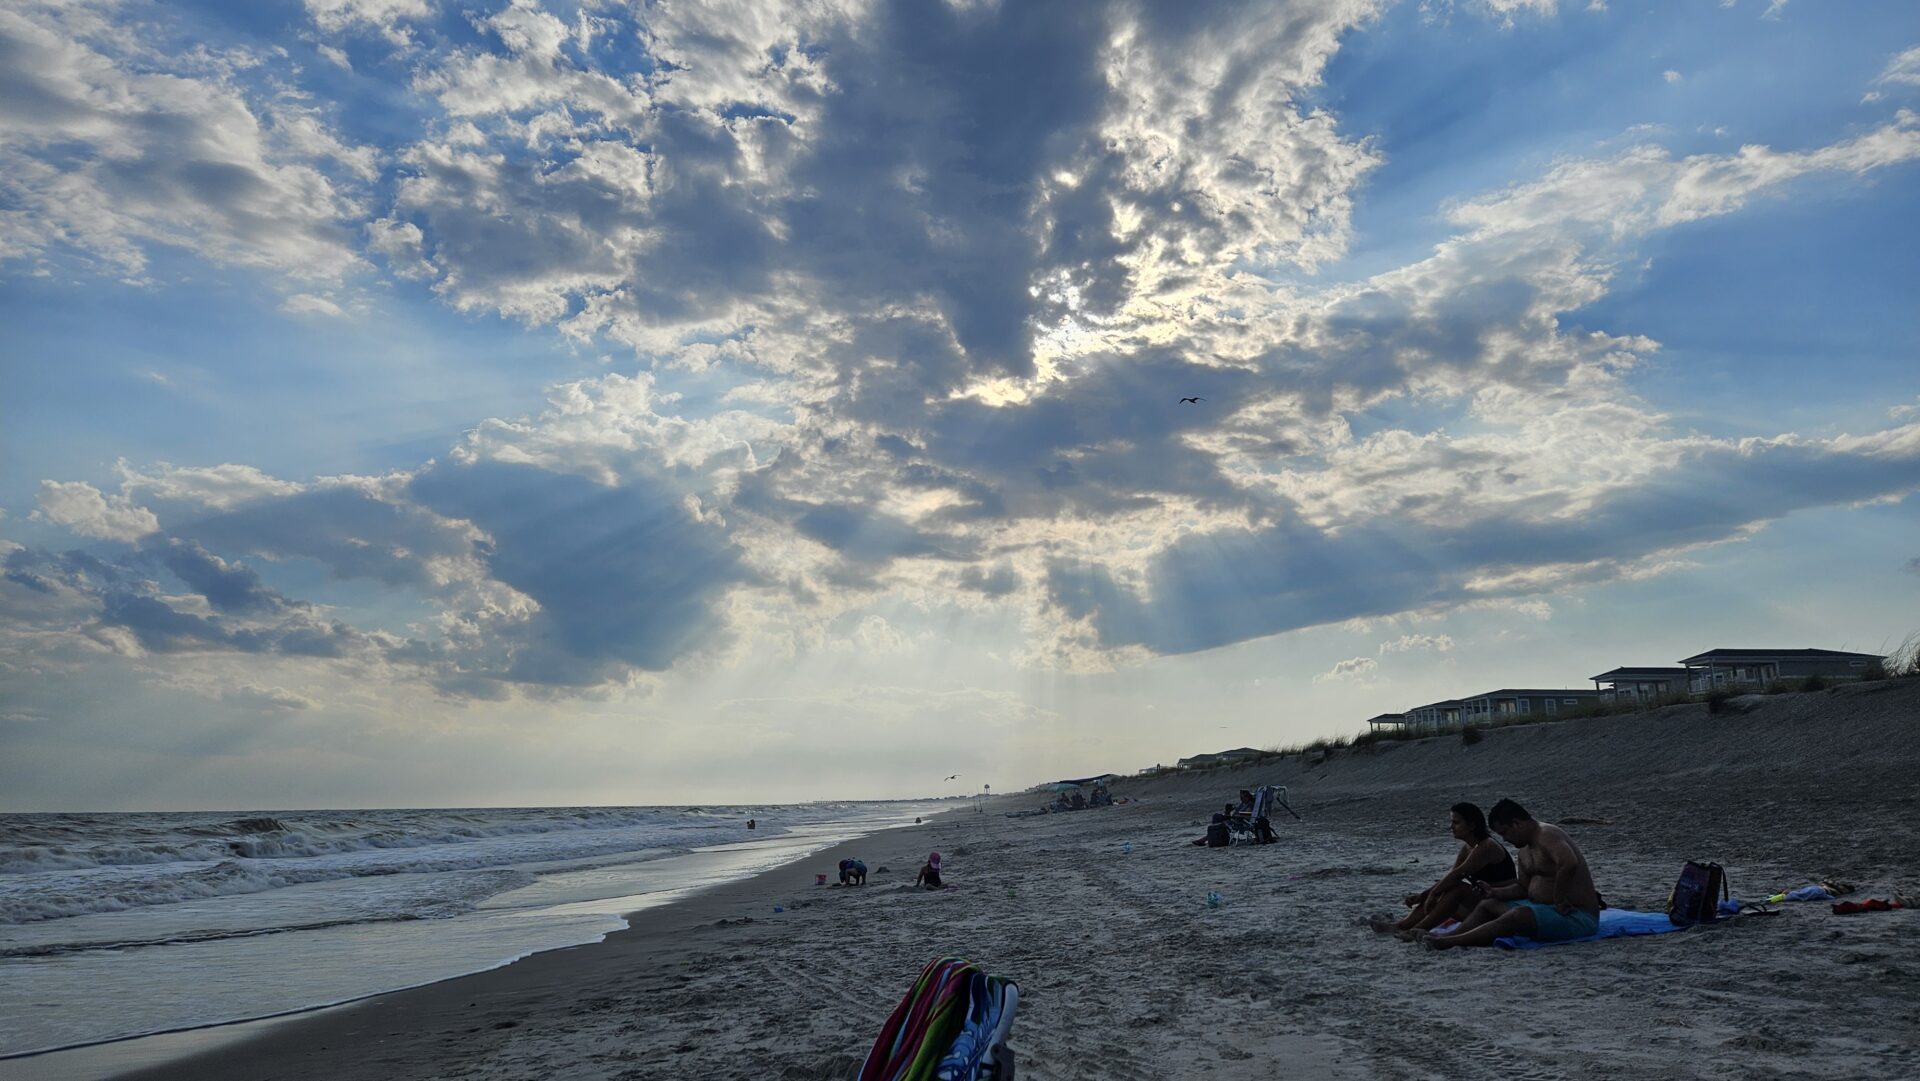 oak-island-nc-clouds-with-rays-of-sun